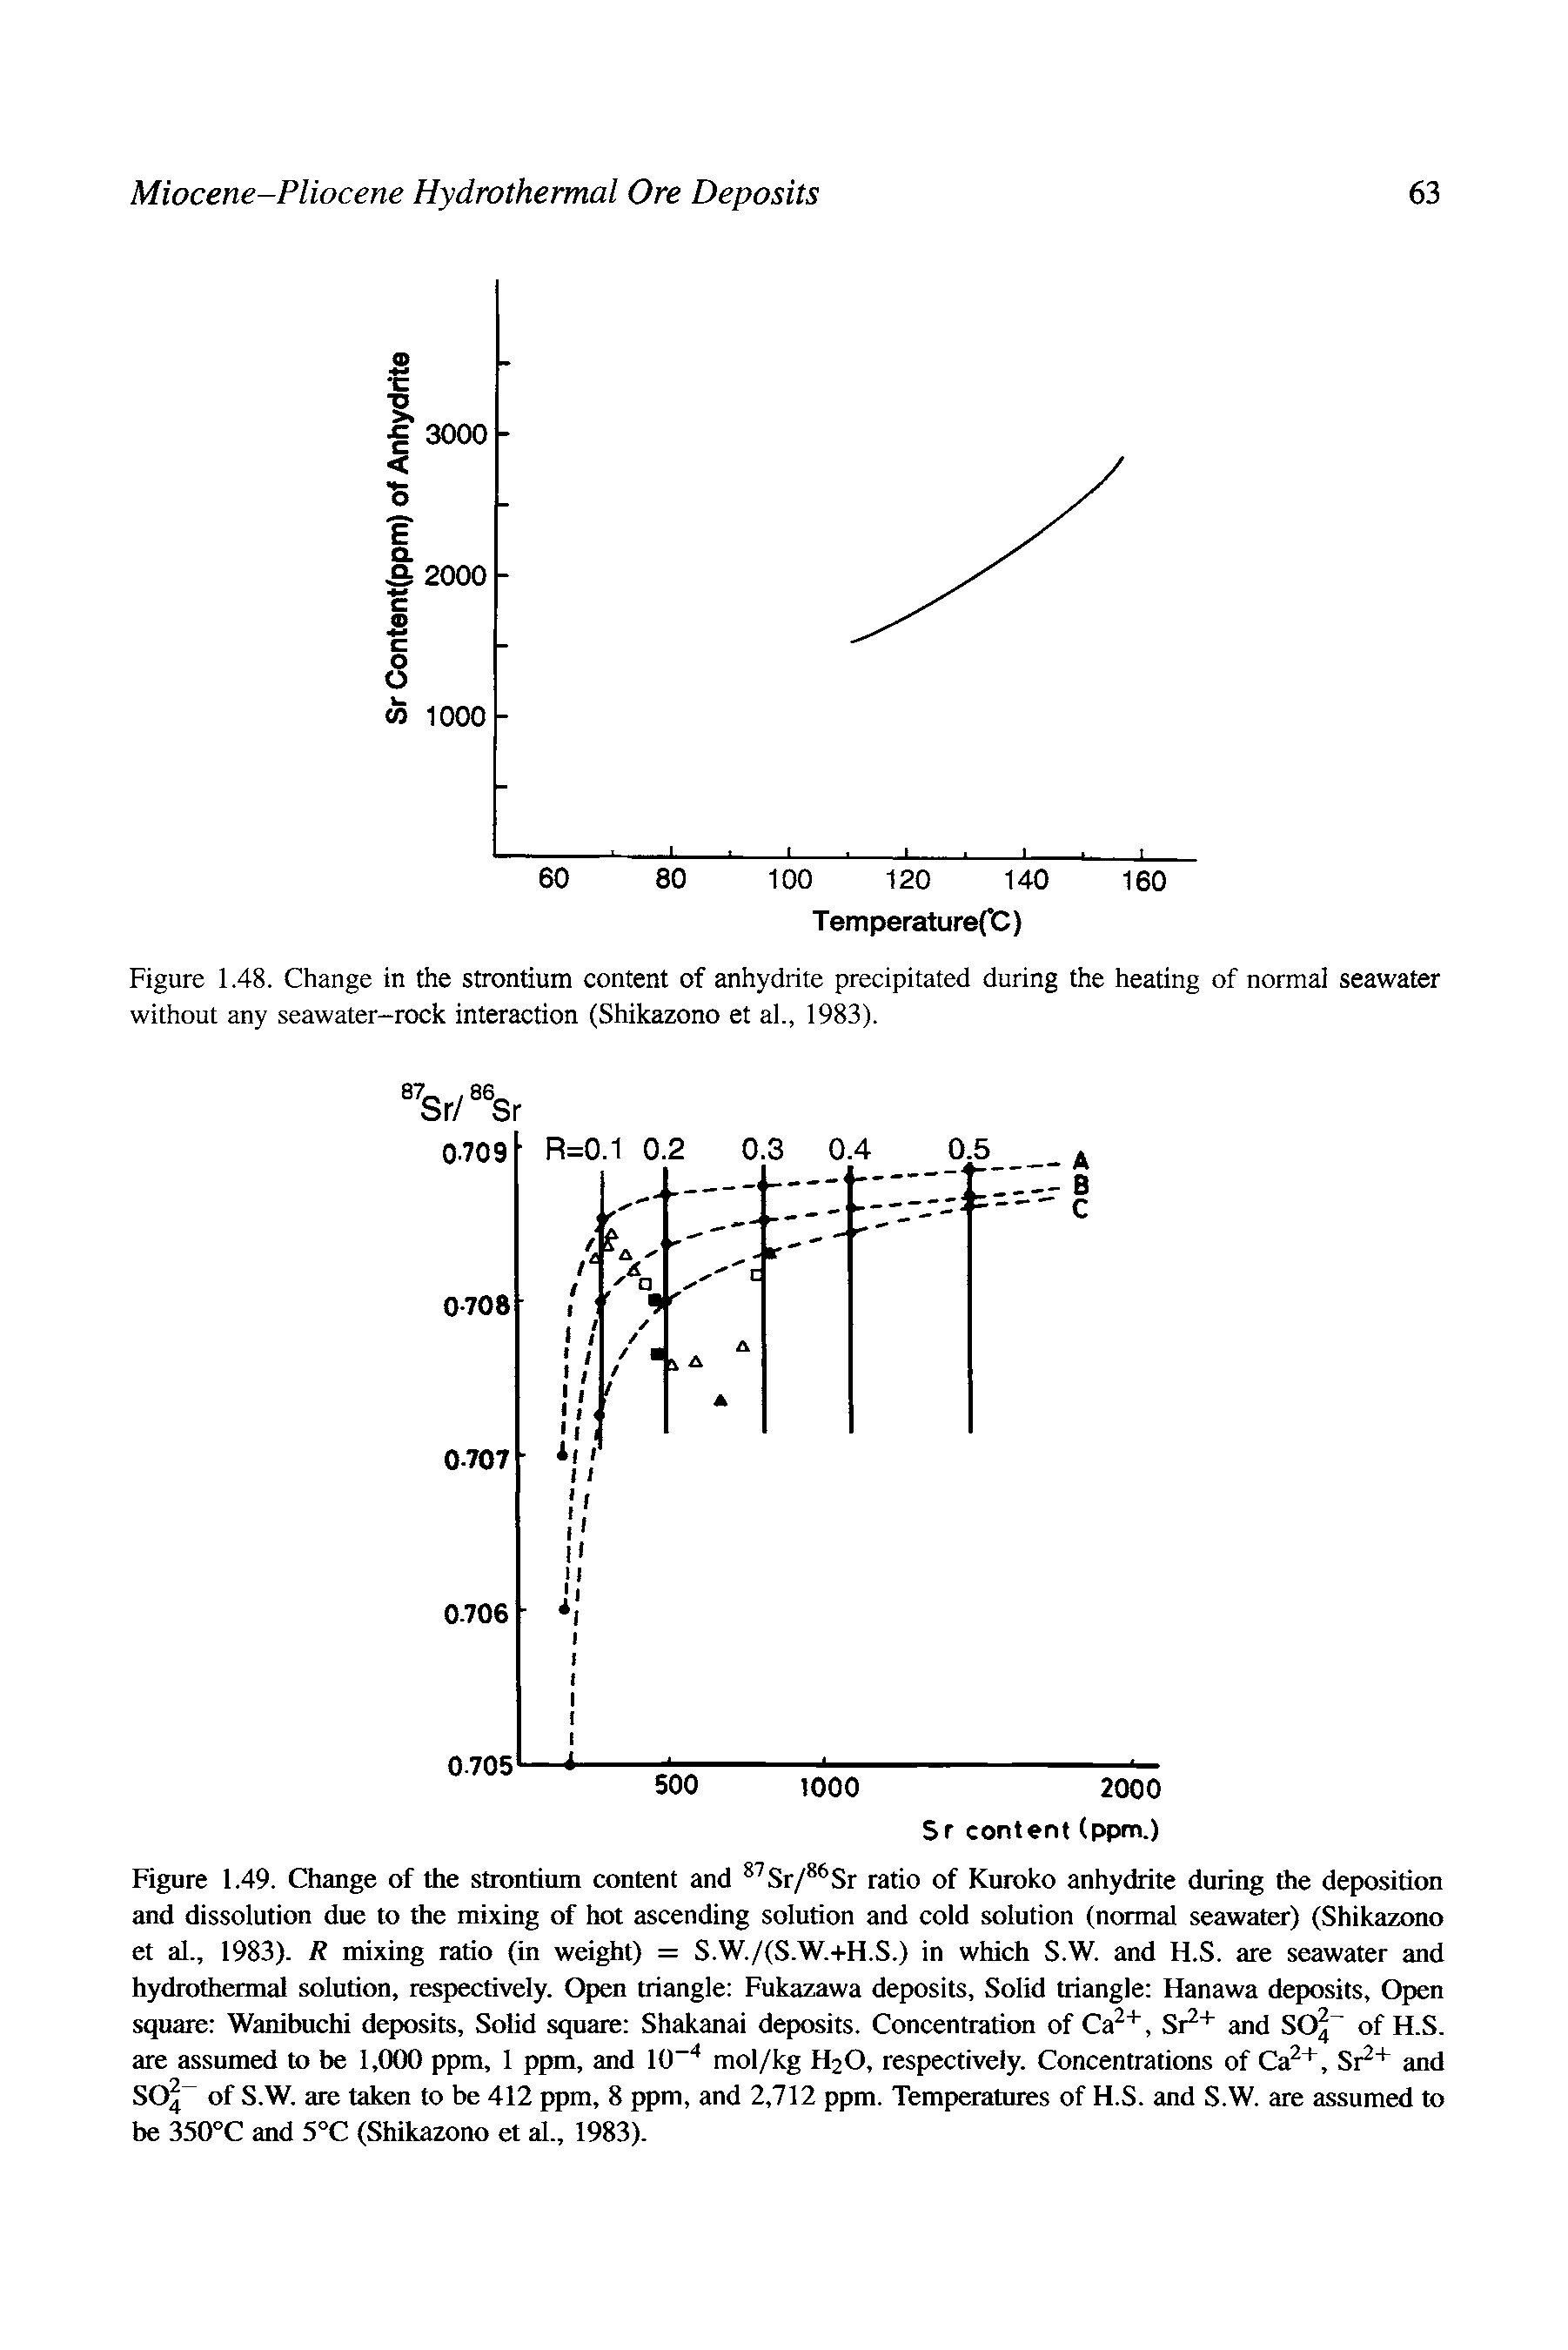 Figure 1.48. Change in the strontium content of anhydrite precipitated during the heating of normal seawater without any seawater-rock interaction (Shikazono et ah, 1983).